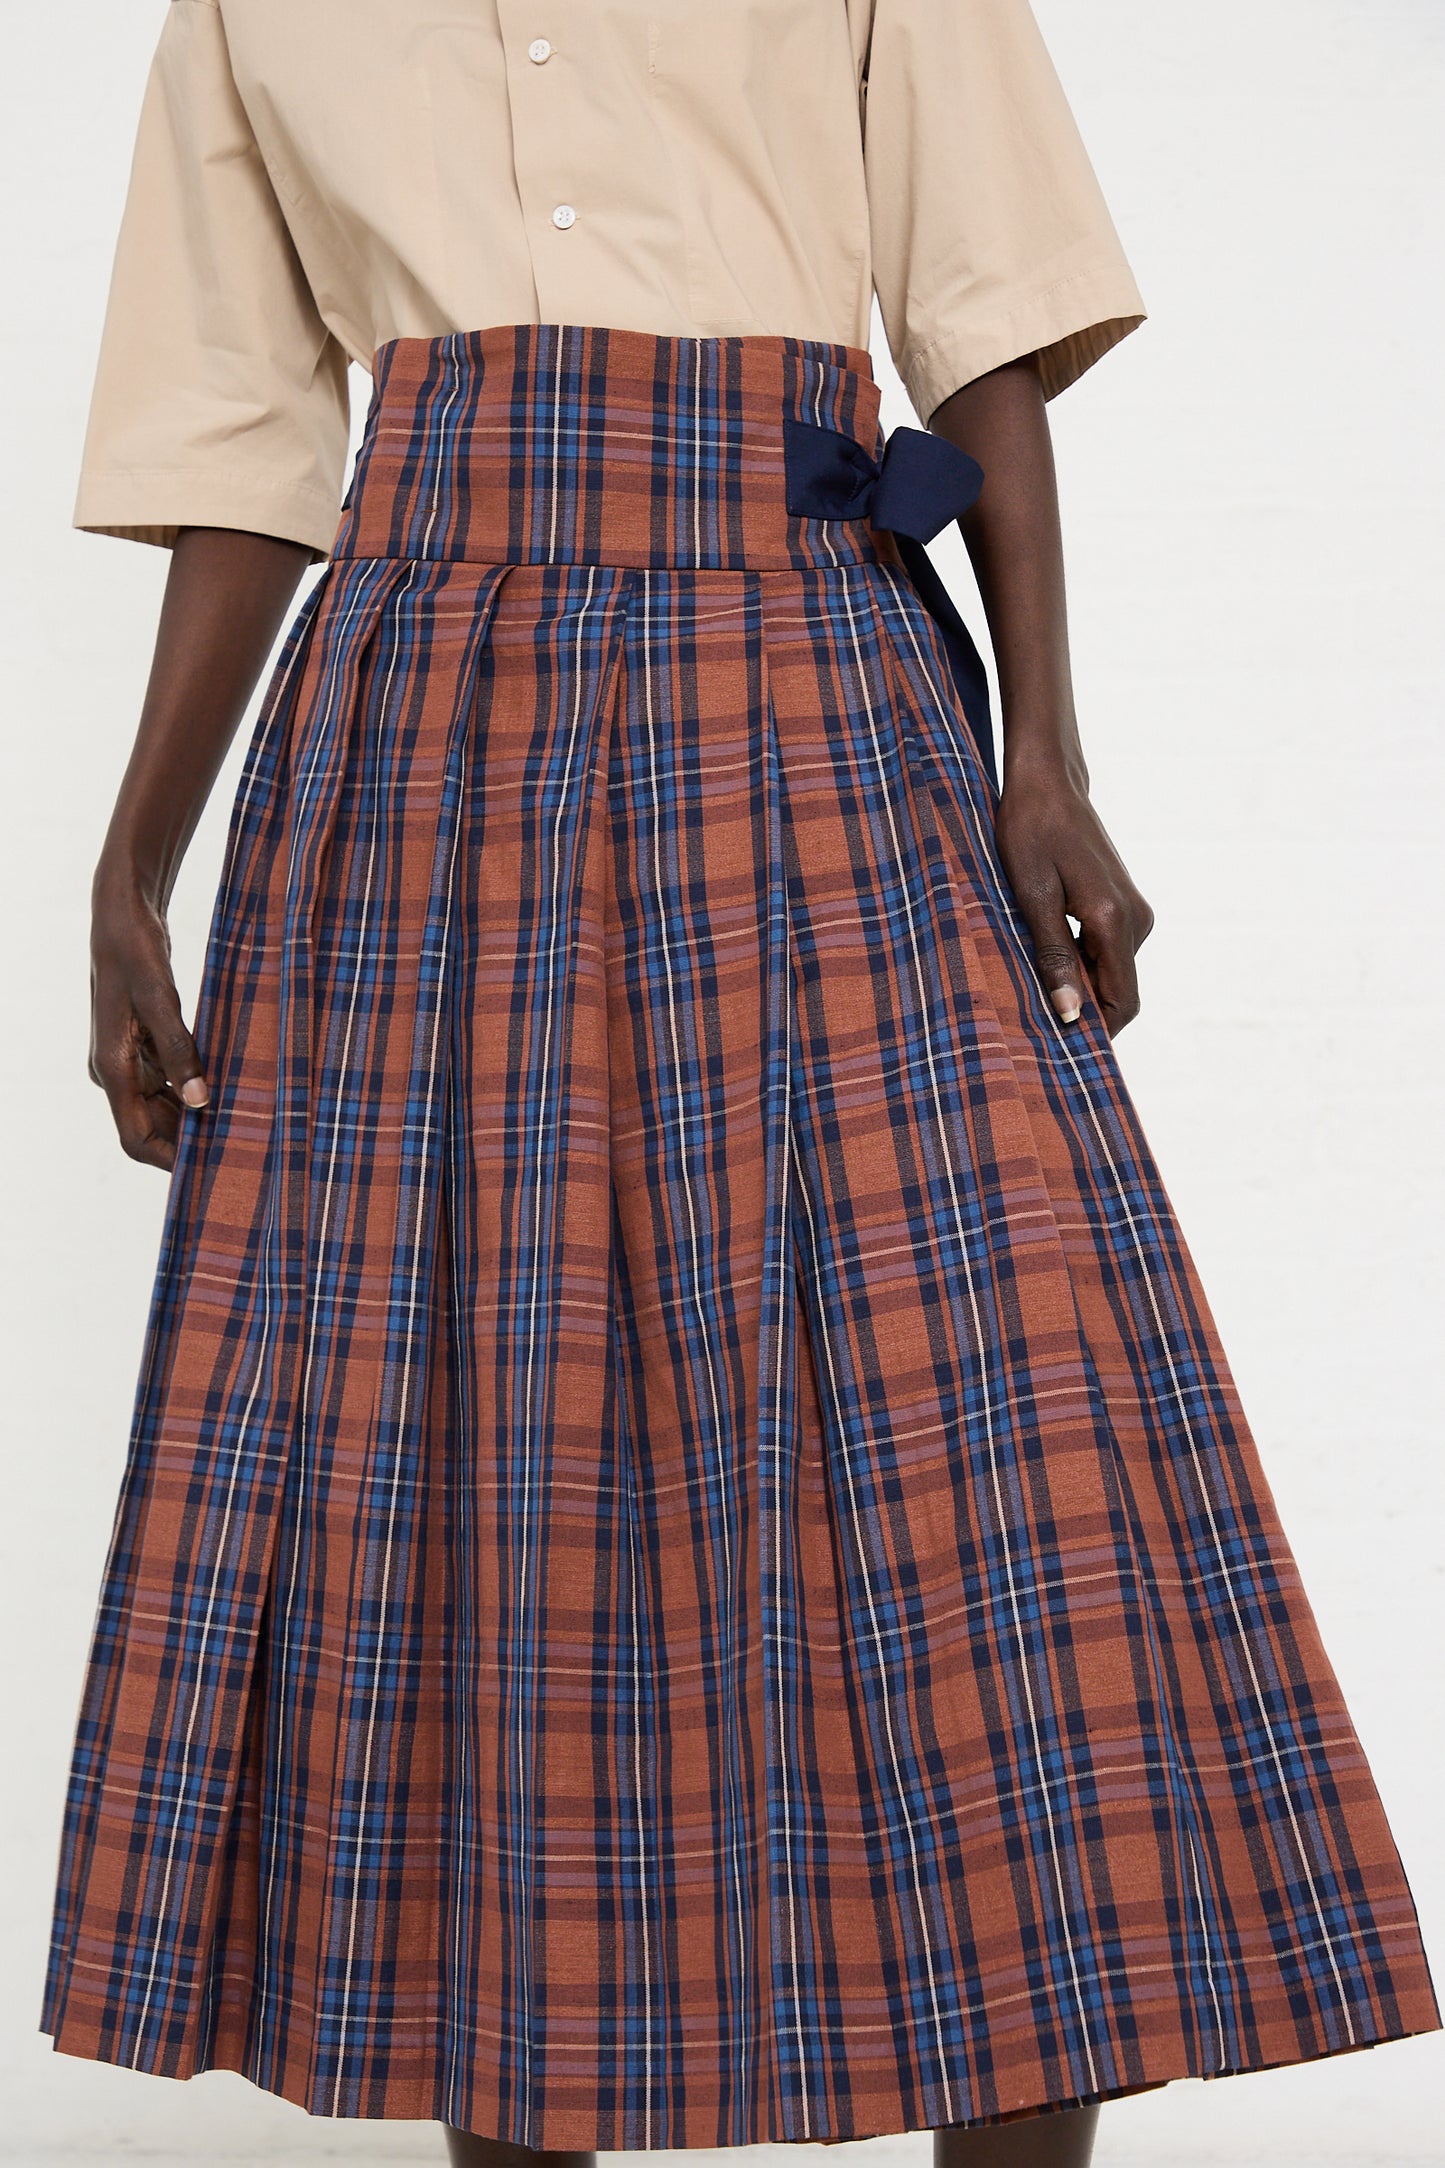 Person wearing a beige shirt and a high-waisted, pleated, ankle-length wrap skirt (Cotton Linen Madras Plaid Cloth Pleated Wrap Maxi Skirt in Brick) by Toujours with a brown, blue, and gray plaid cotton/linen blend pattern.